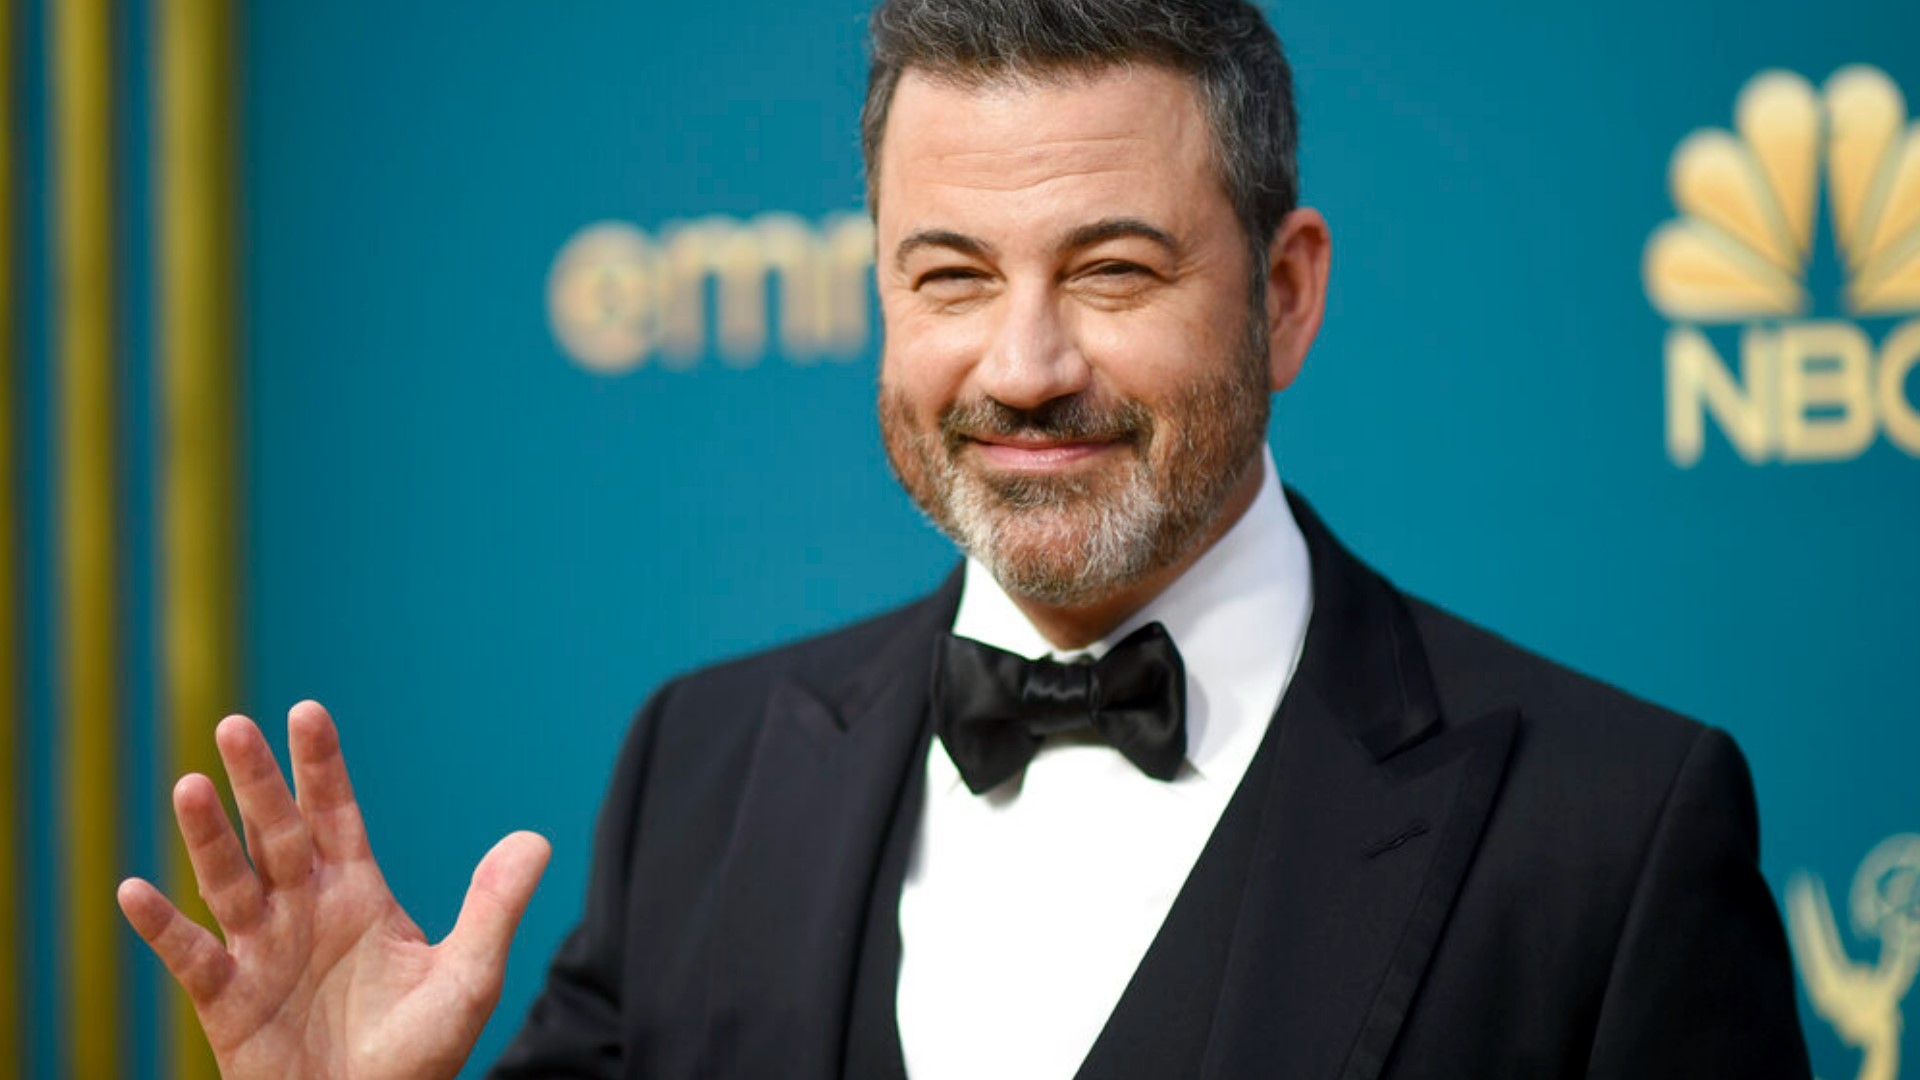 Kimmel's show debuted on ABC in January 2003, and the new deal means he will remain the host at least into the 2025-2026 season.